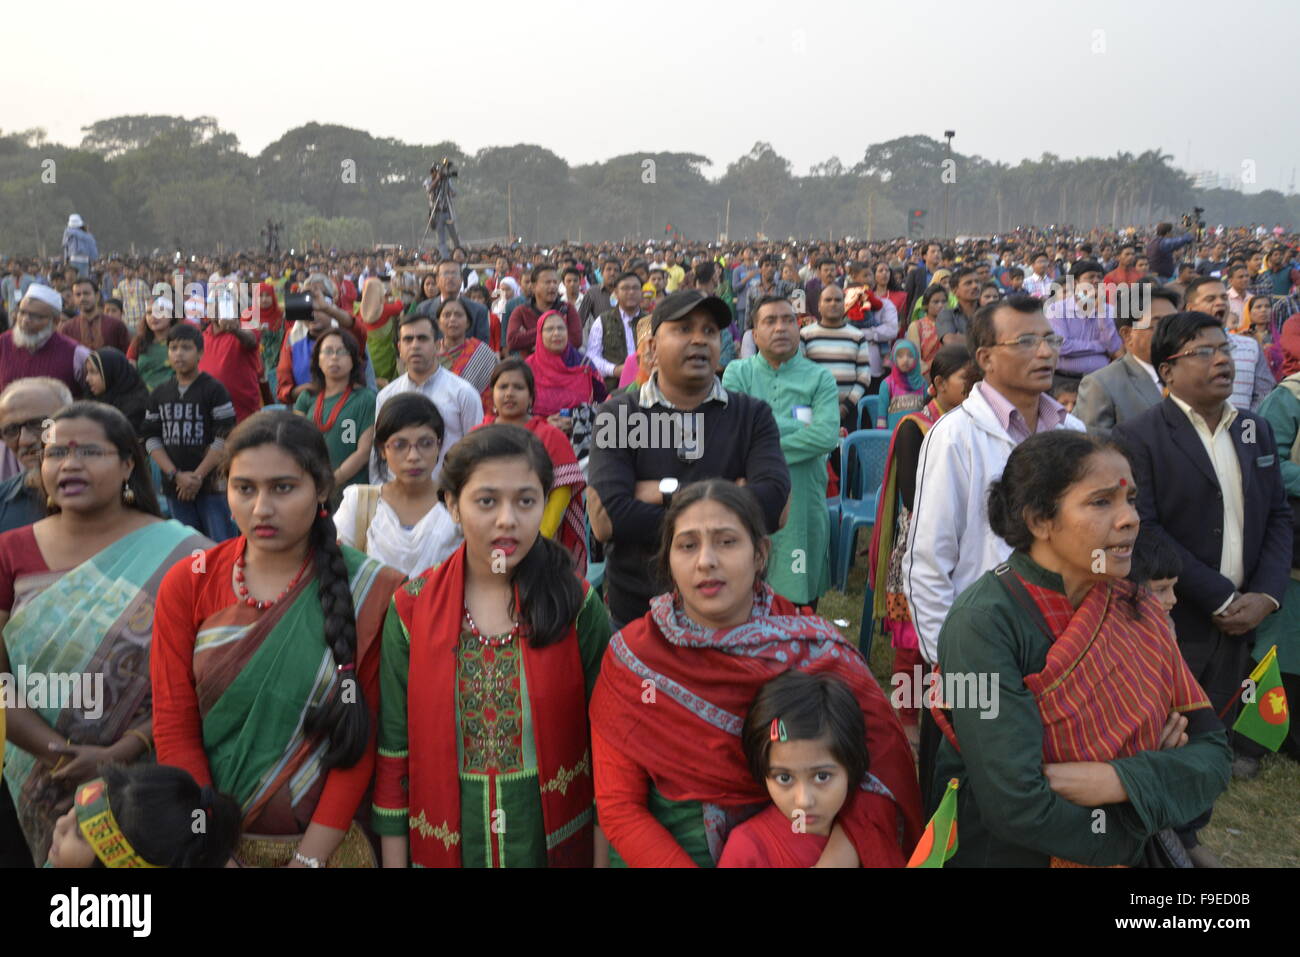 Dhaka, Bangladesh. 16th Dec, 2015. Bangladeshi people singing the national anthem at 4.31pm, the exact moment when the Pakistan army surrendered on this day in 1971, as they gather at a rally to mark the country's Victory Day at Suhrawardy Udyan in Dhaka on December 16, 2015. Credit:  Mamunur Rashid/Alamy Live News Stock Photo